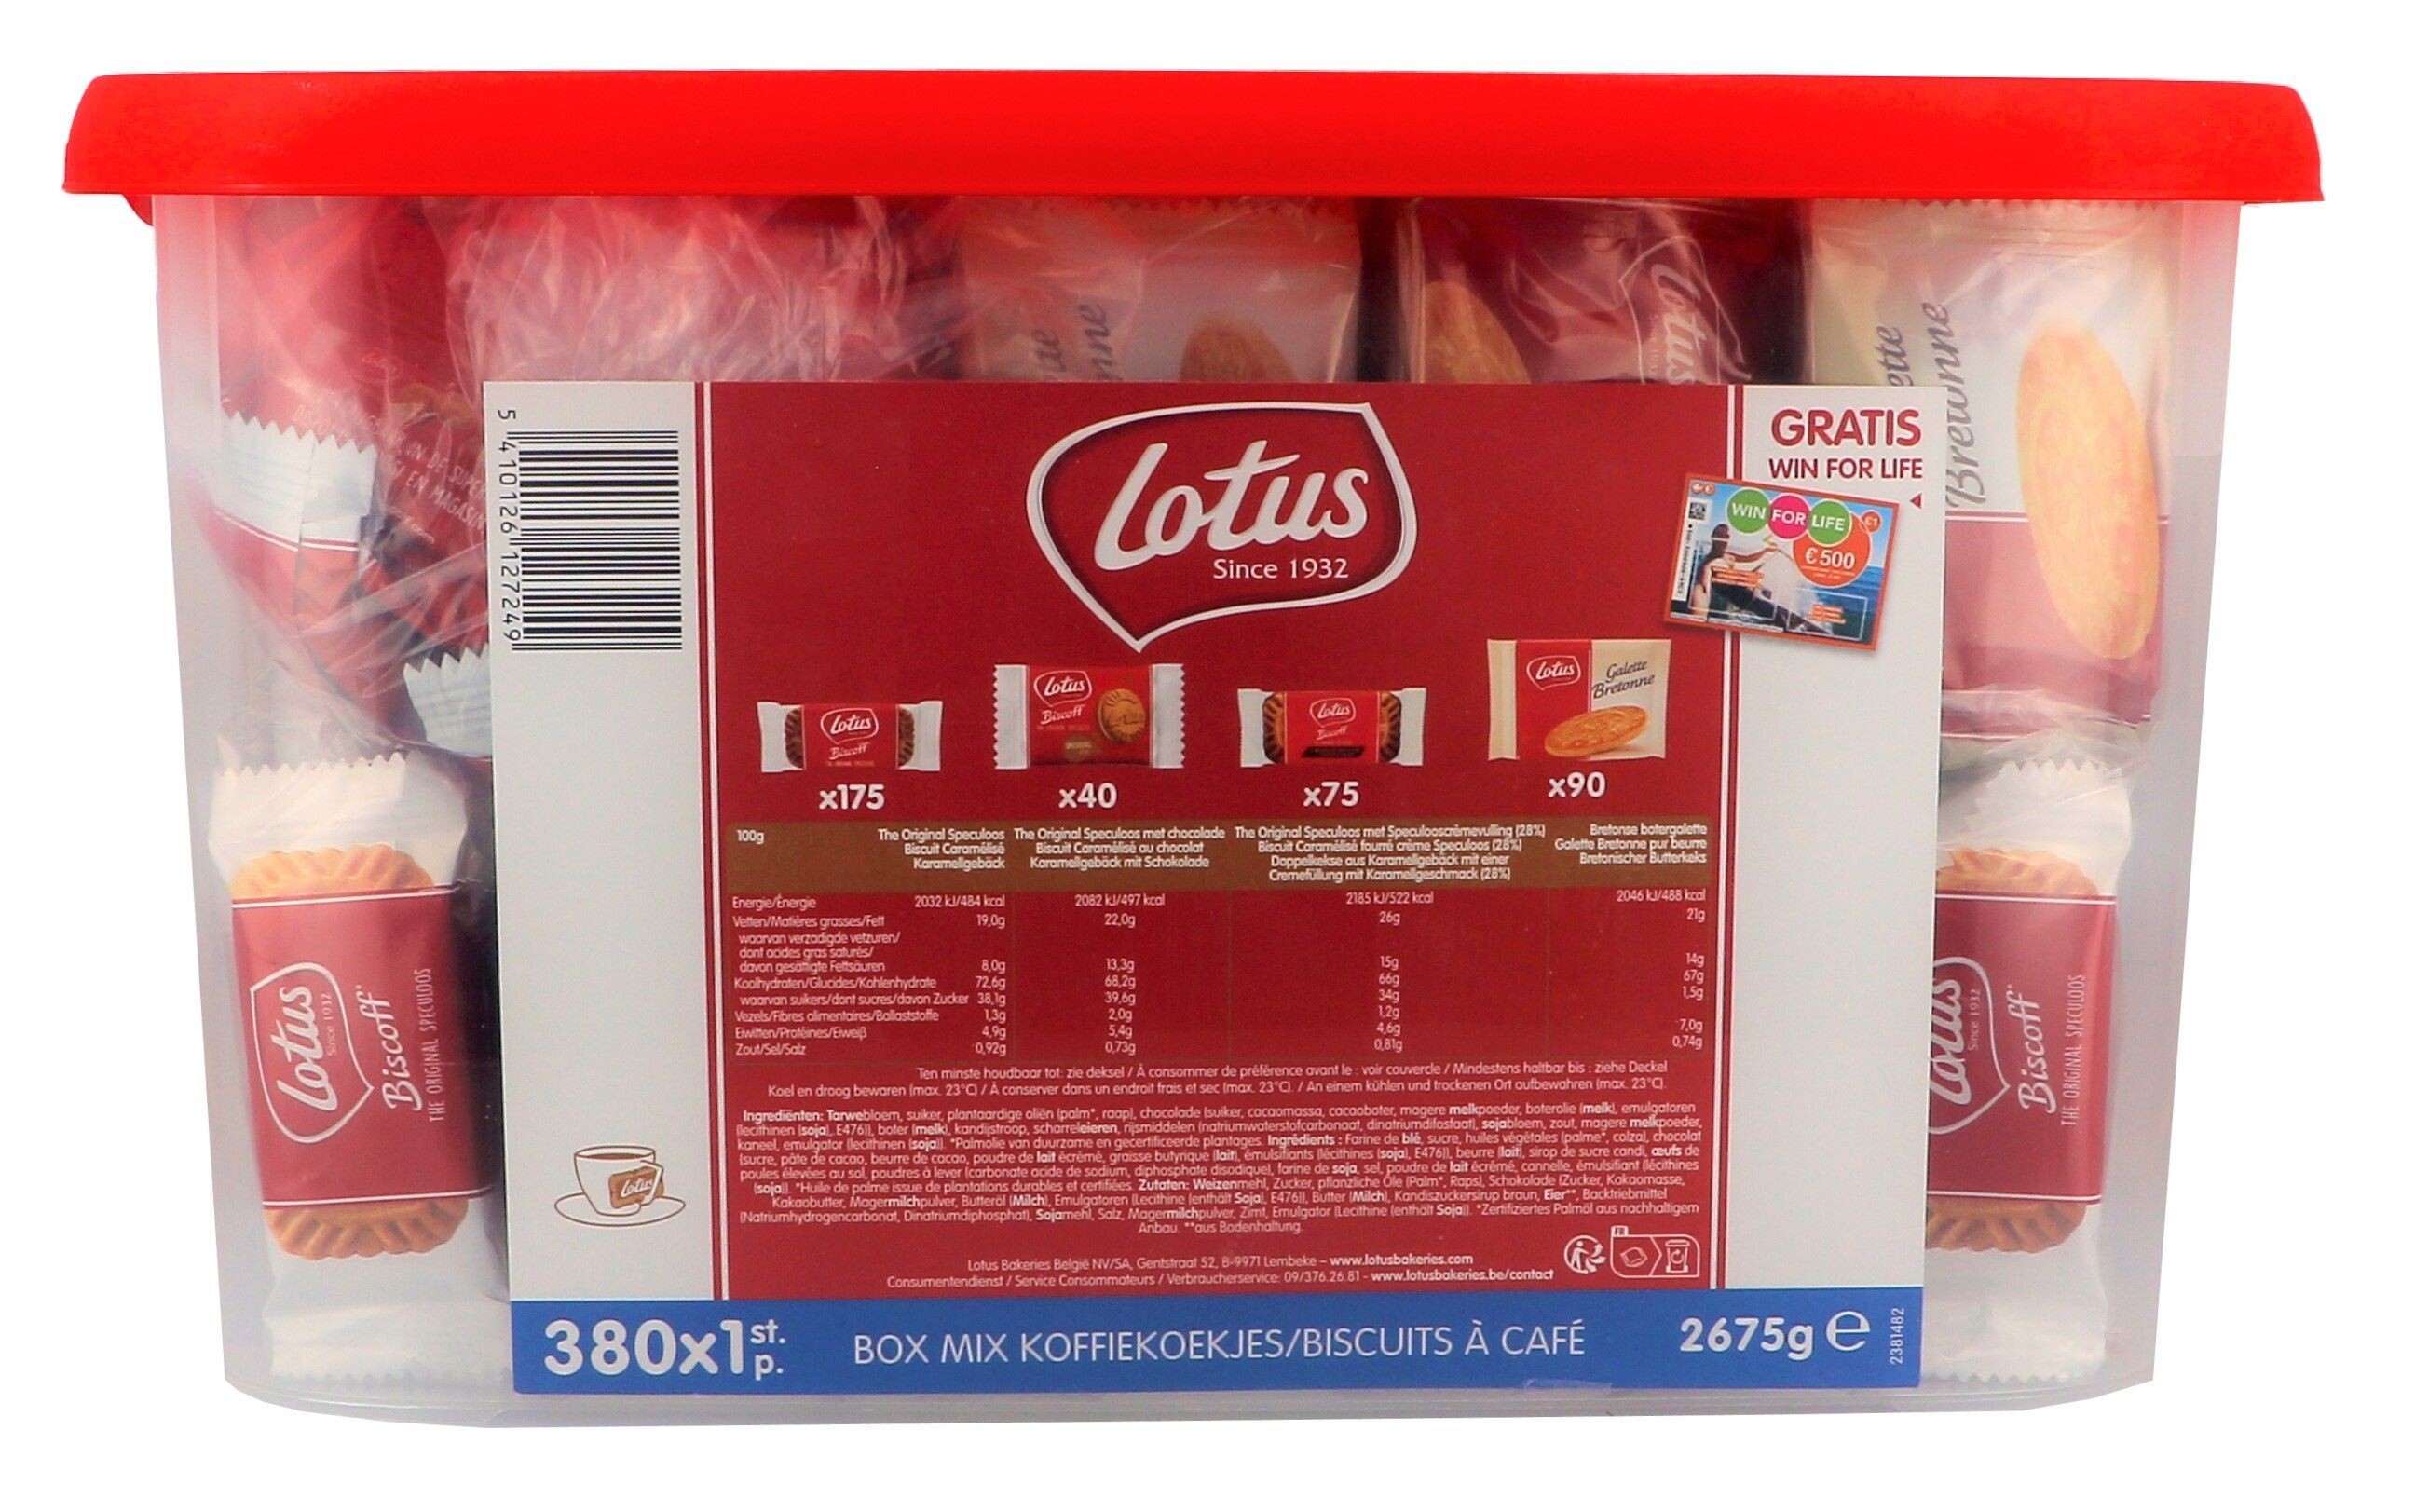 Lotus Biscoff Biscuits Horeca Box 380pcs individually wrapped + Win For Life